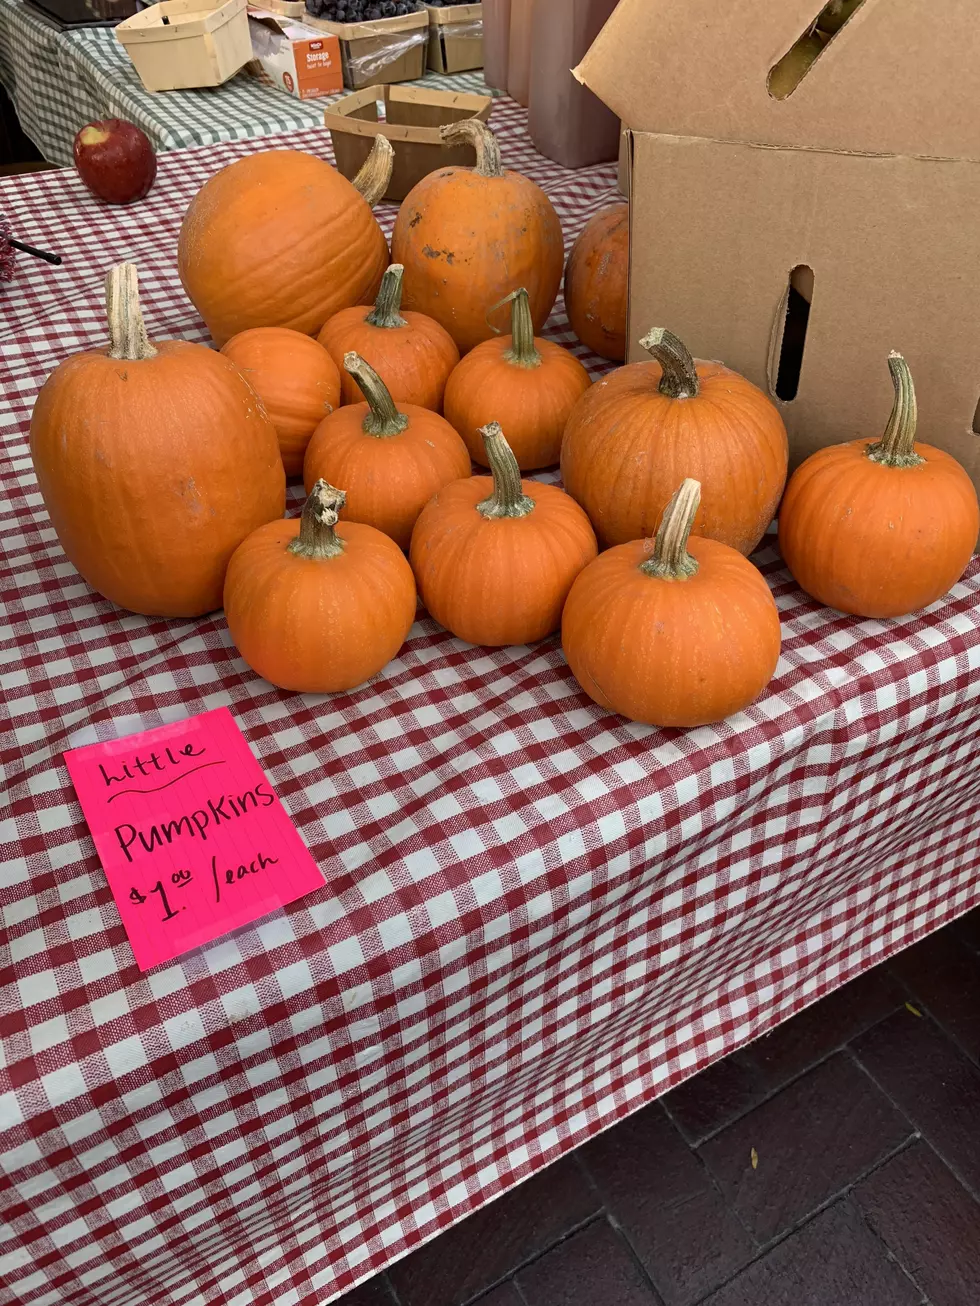 This Was a Great Place to Get a Last Minute Pumpkin